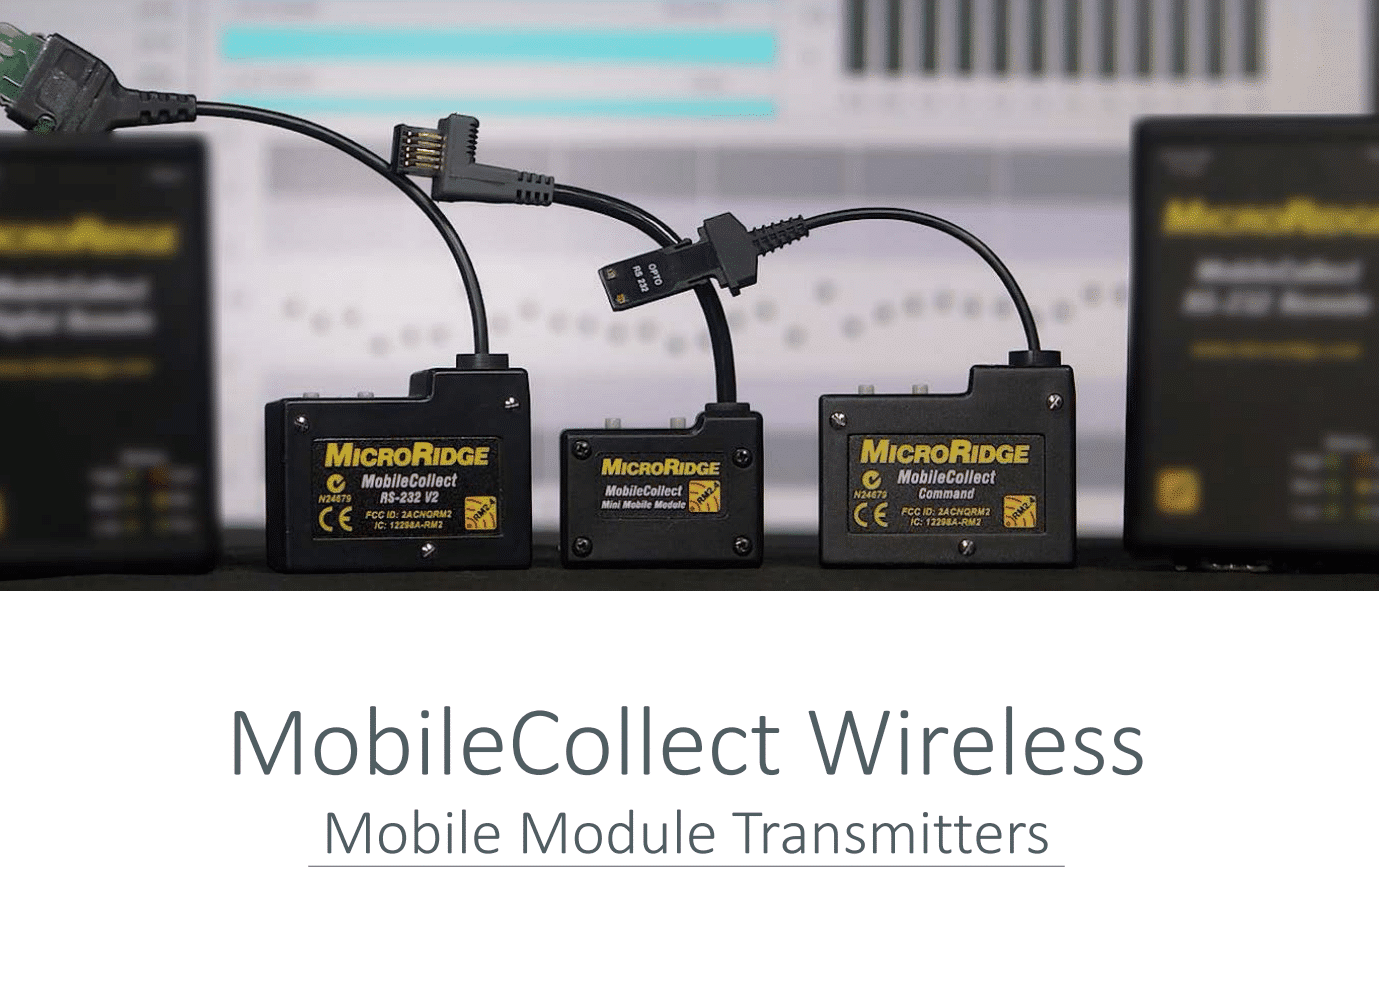 MobileCollect Wireless Mobile Module Transmitters